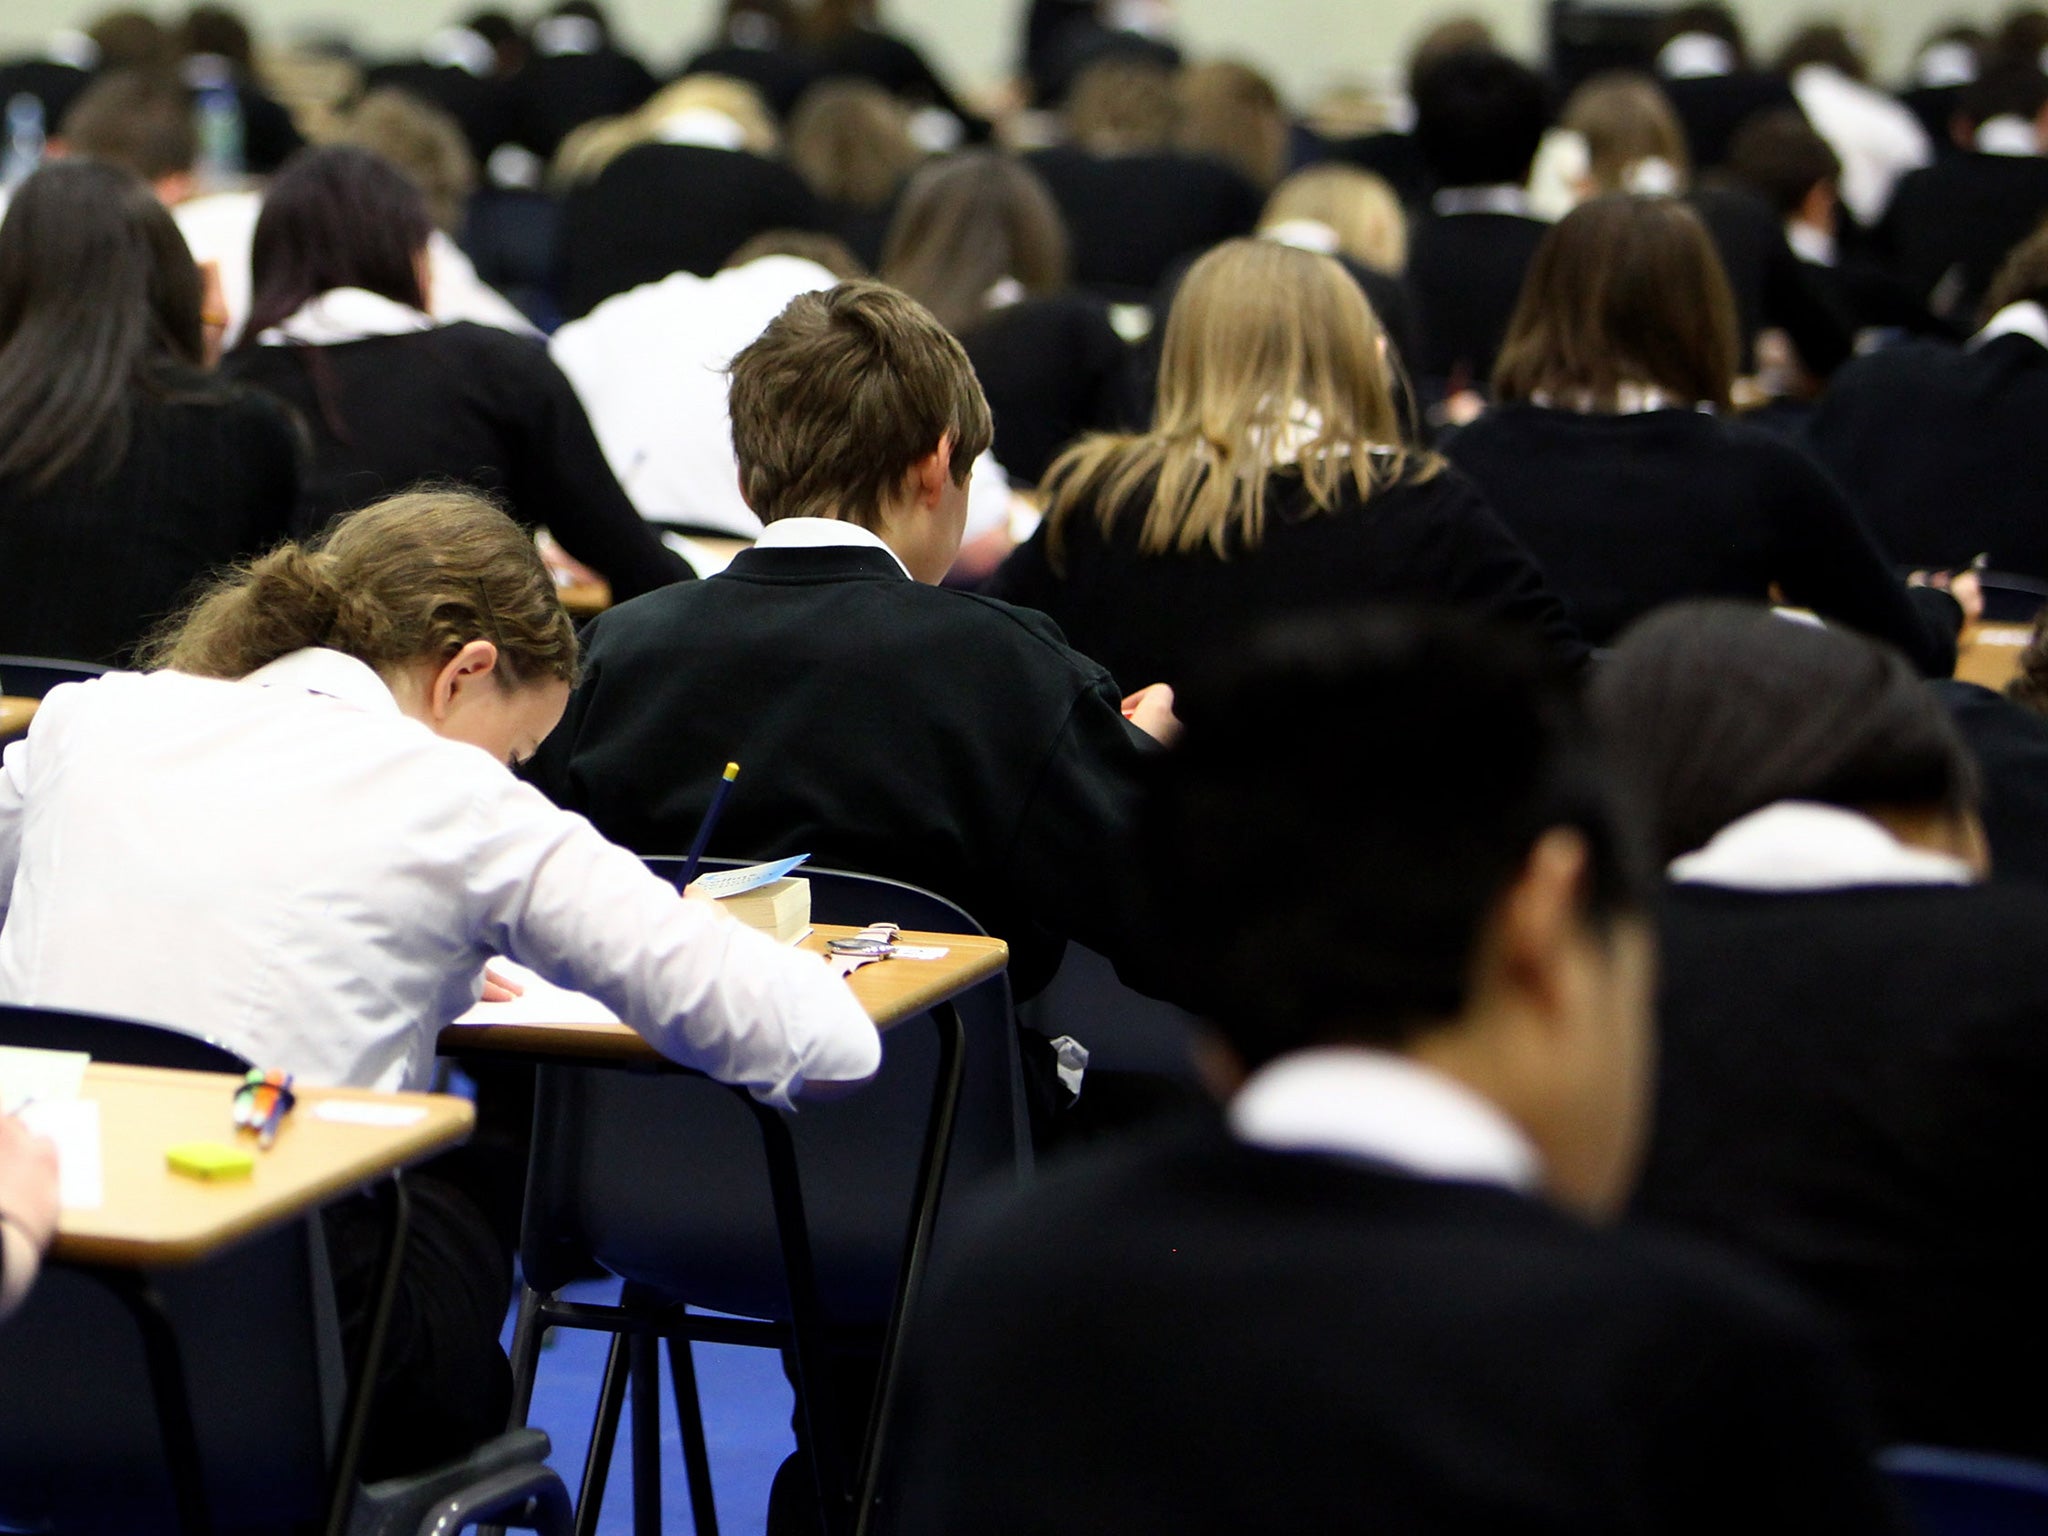 Ofsted have asked Wiltshire council to investigate a school's bizarre punishments